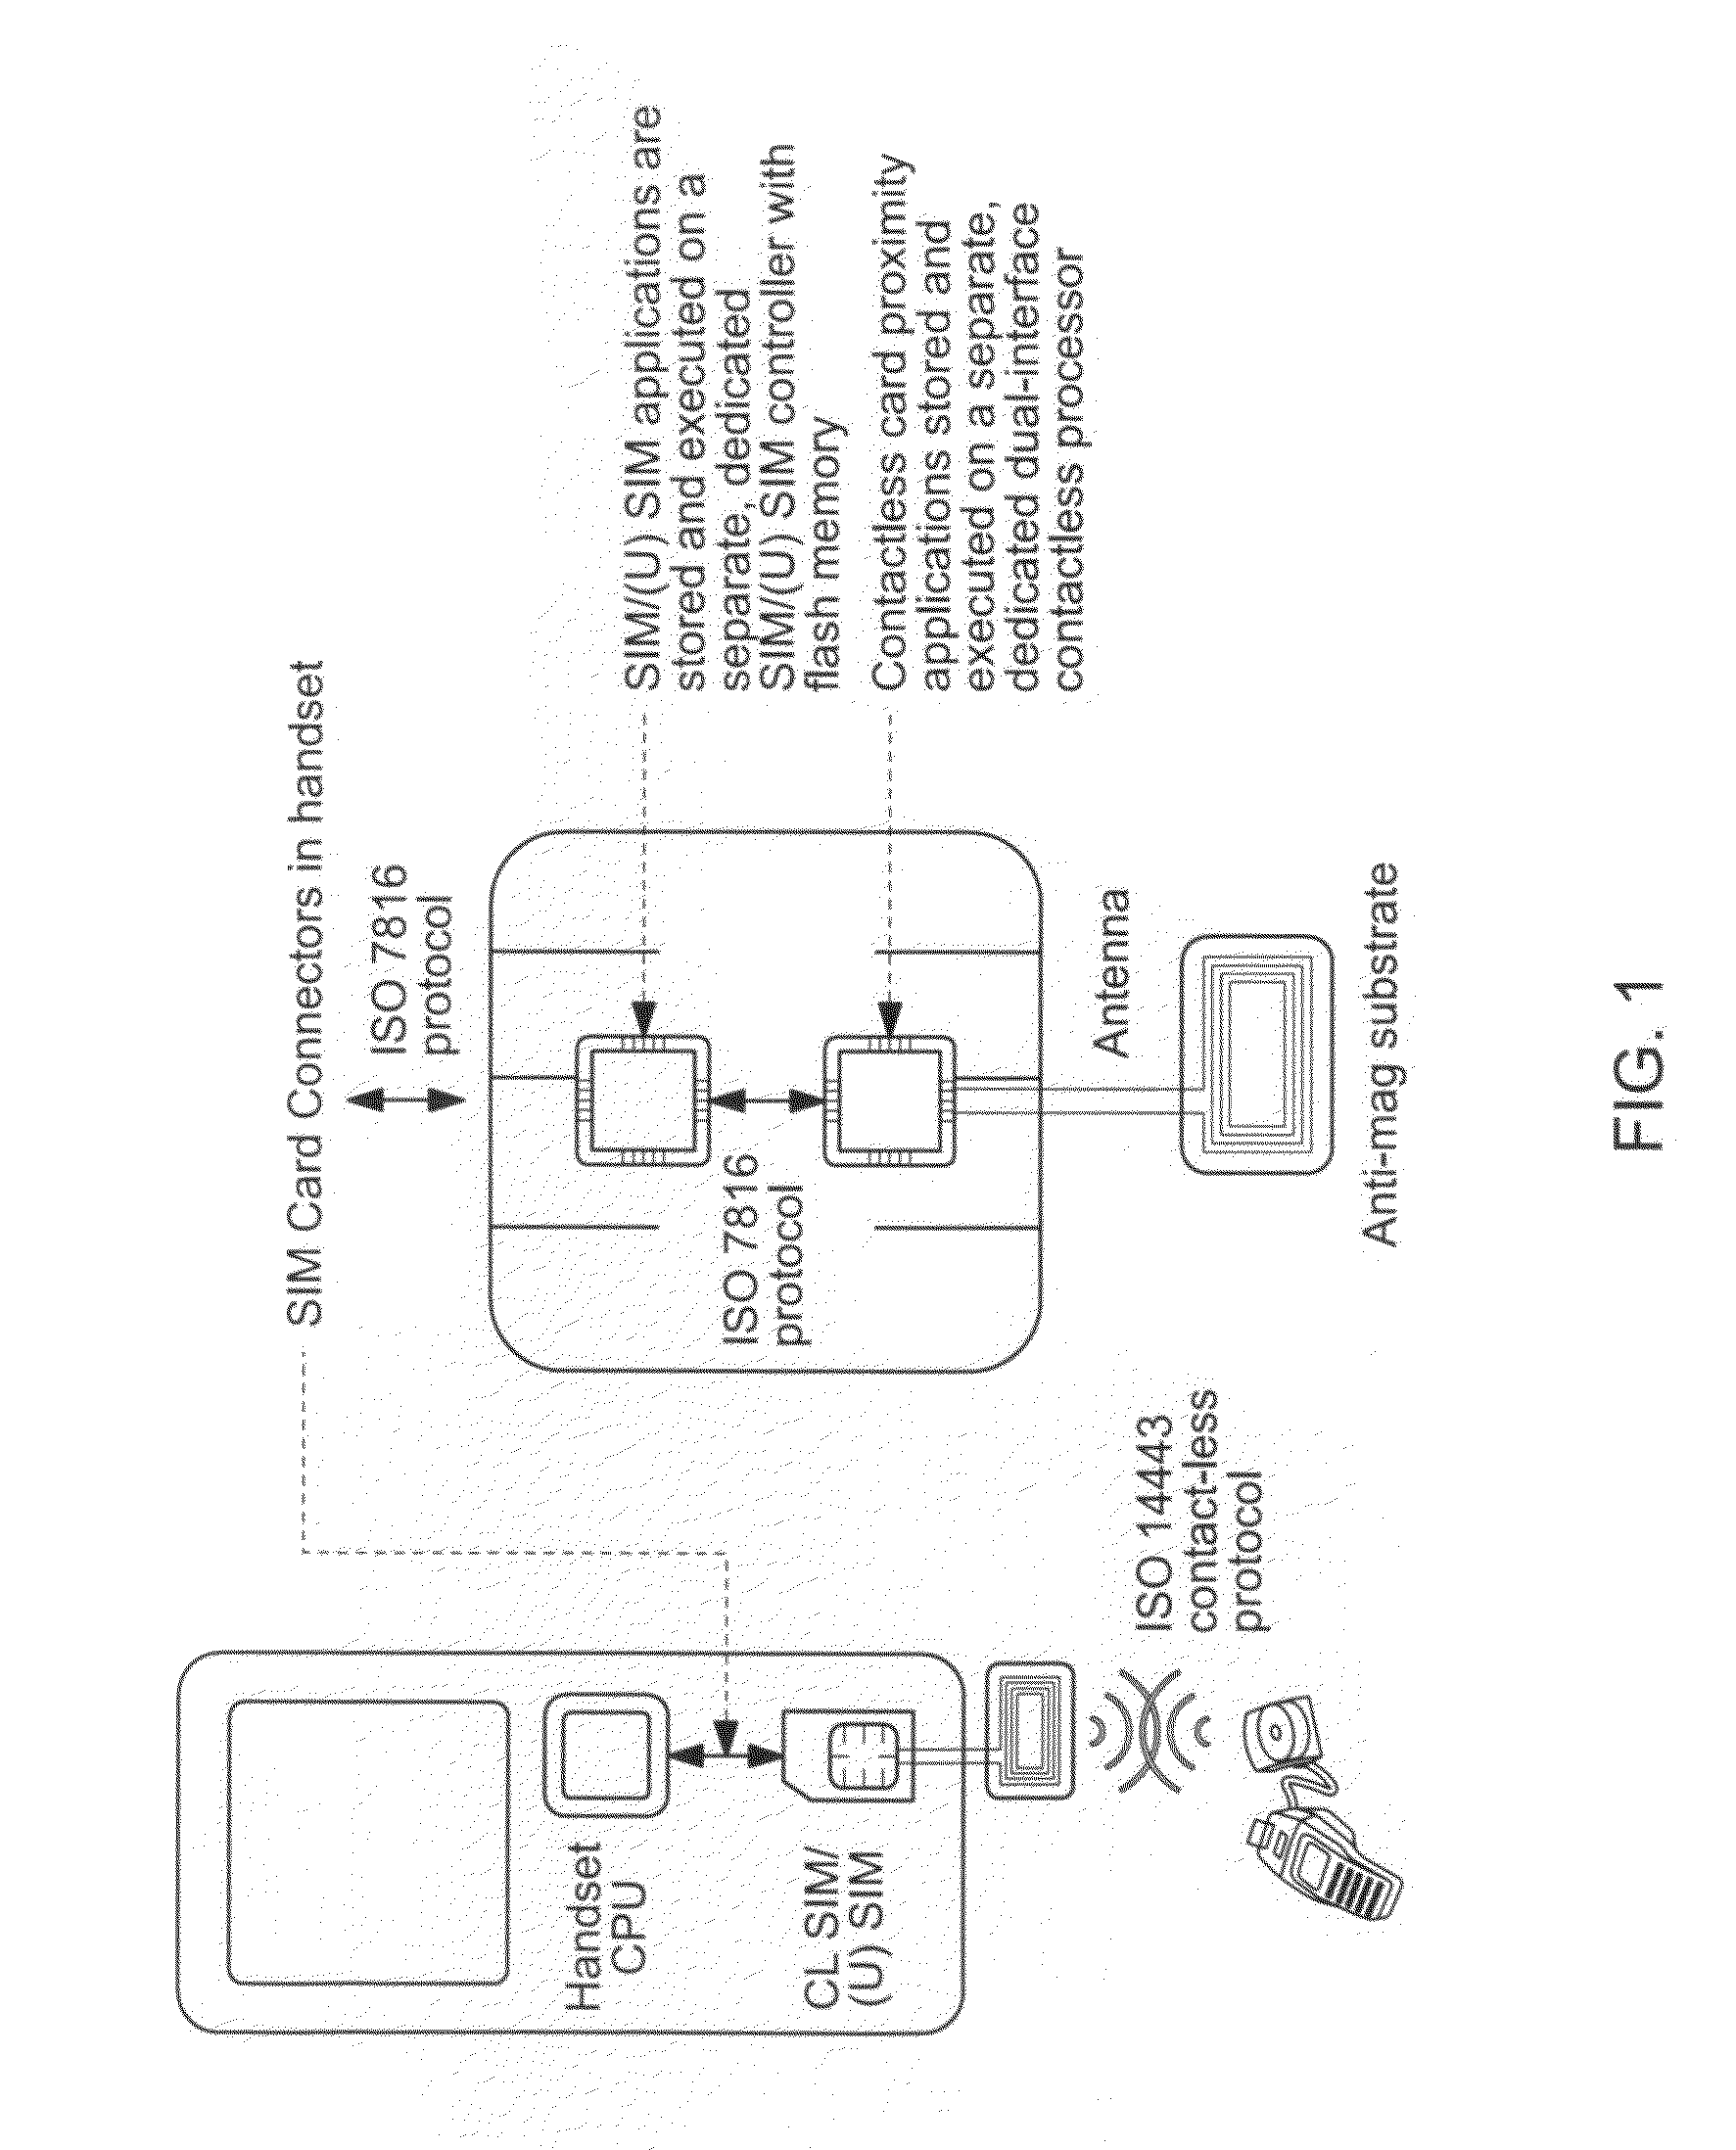 Integrated System and Method for Enabling Mobile Commerce Transactions using "Contactless Identity Modules in Mobile Handsets"